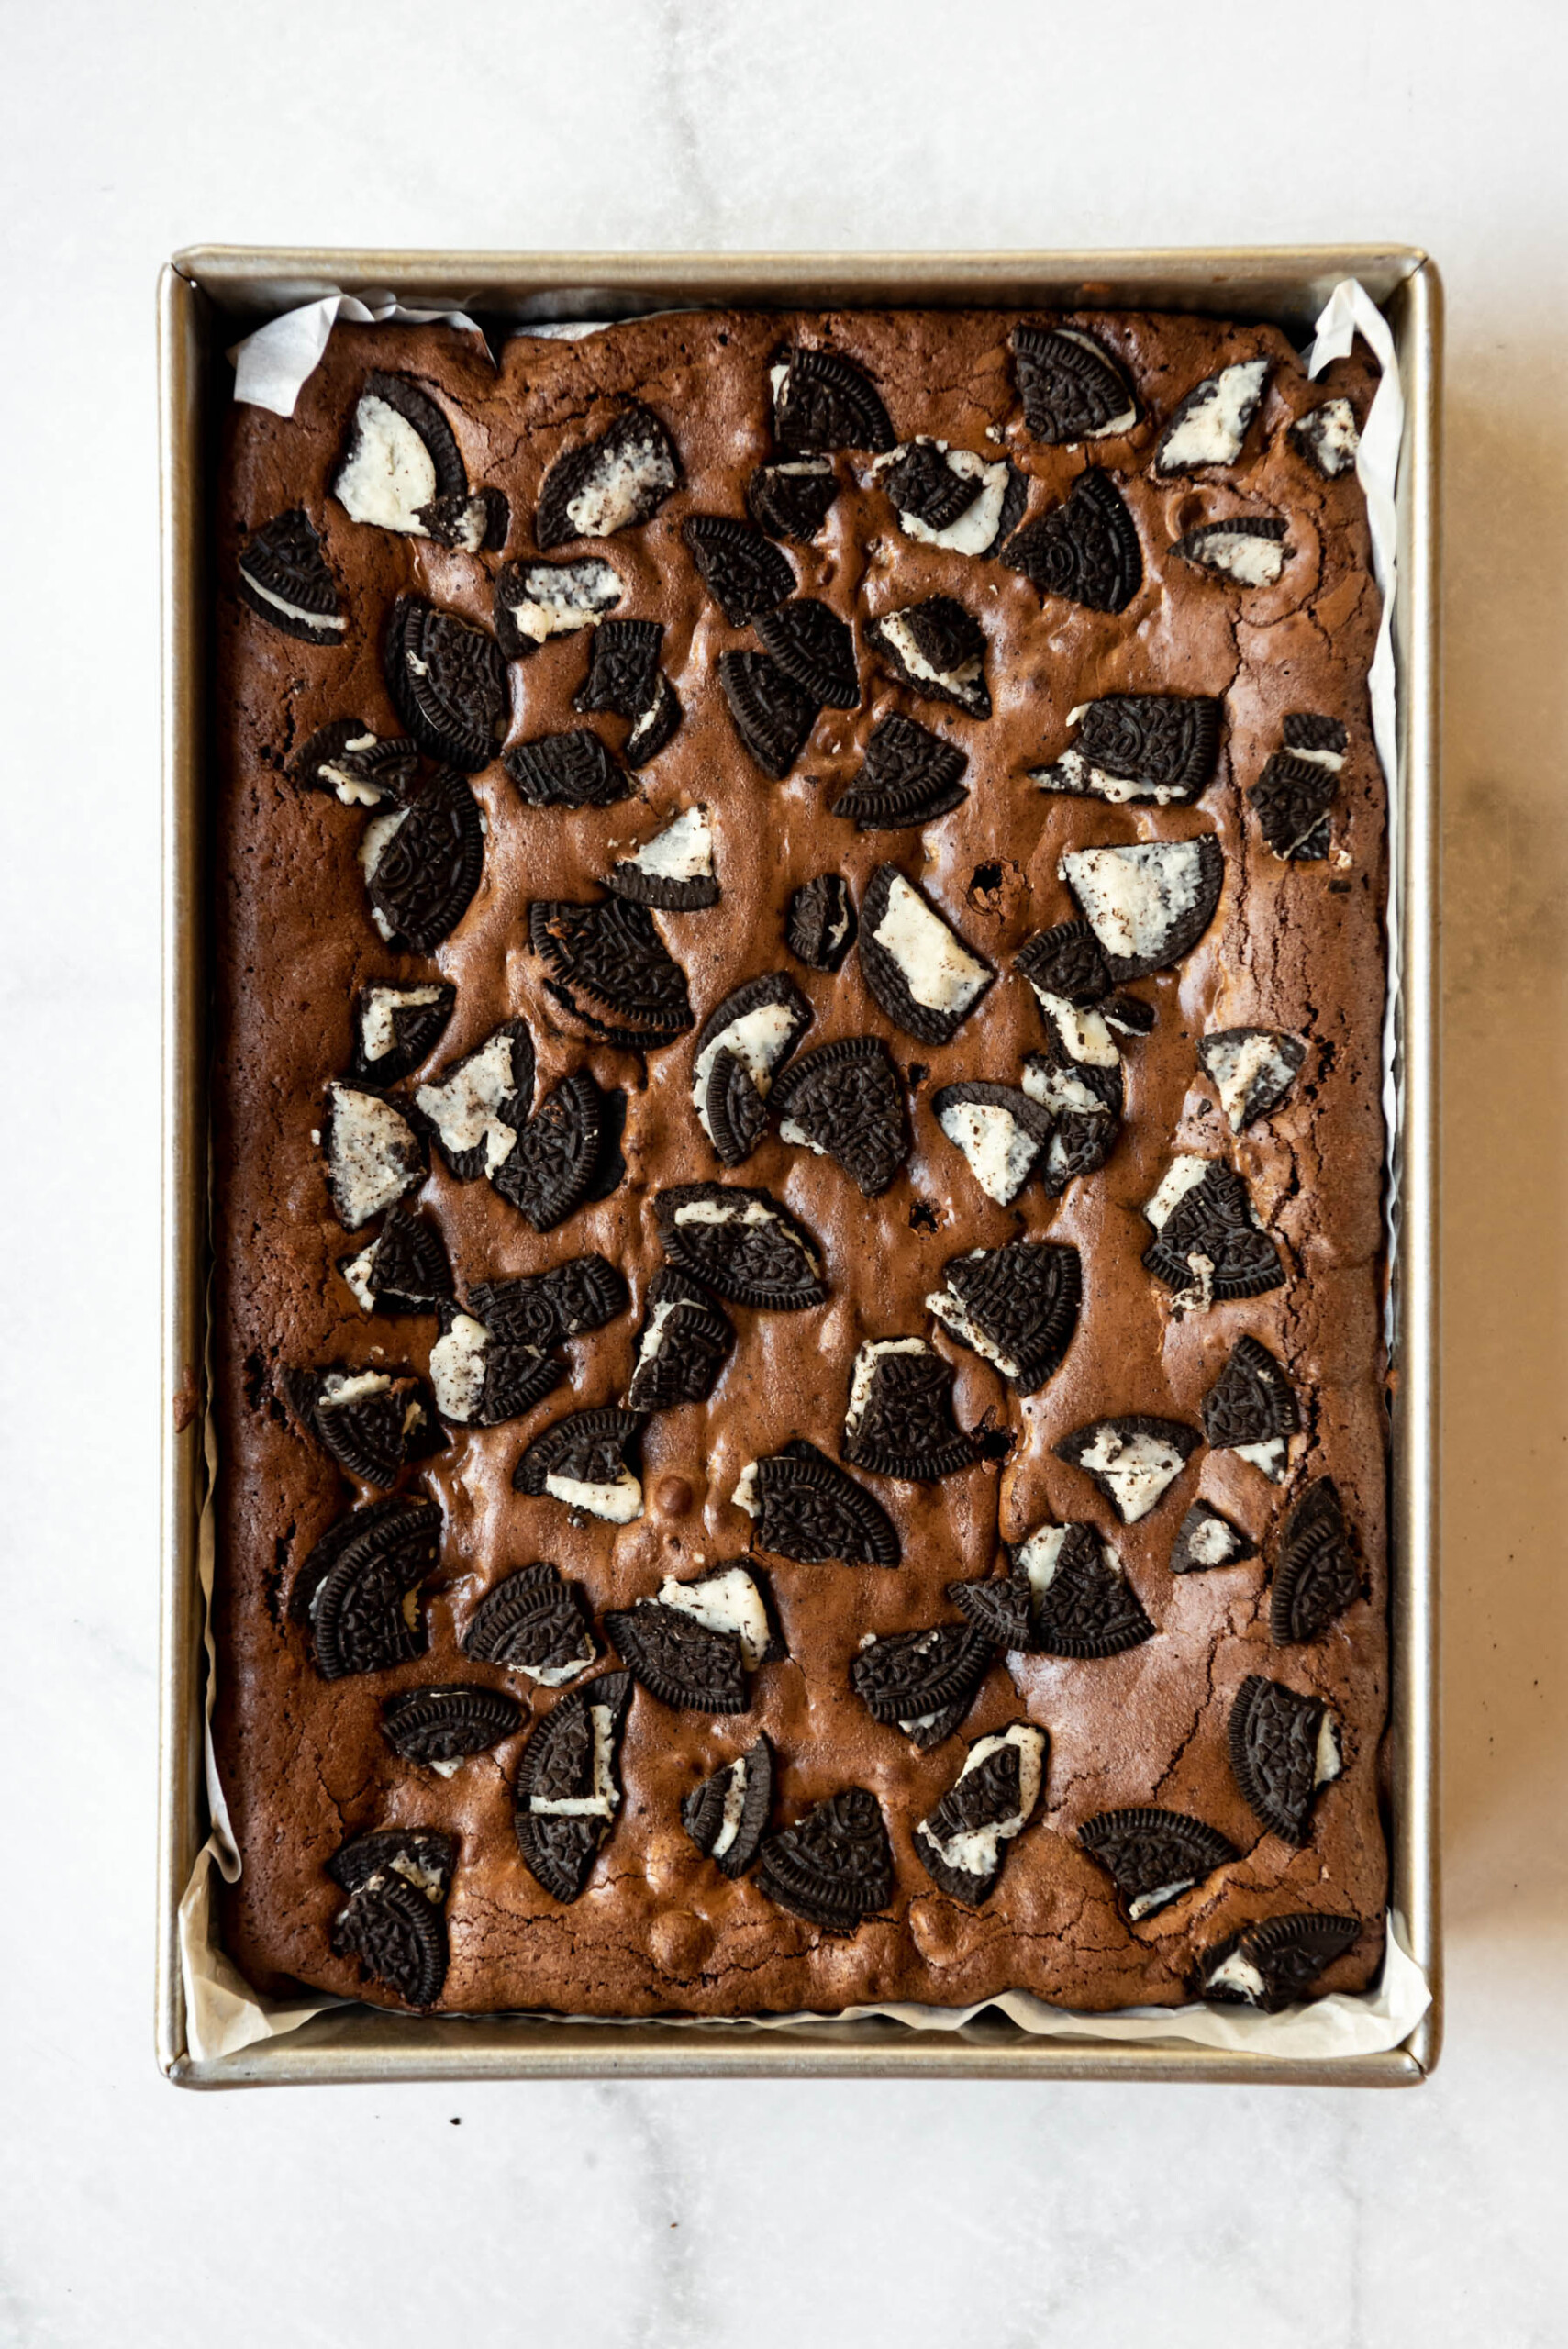 Baked Oreo brownies in a 9x13-inch pan.